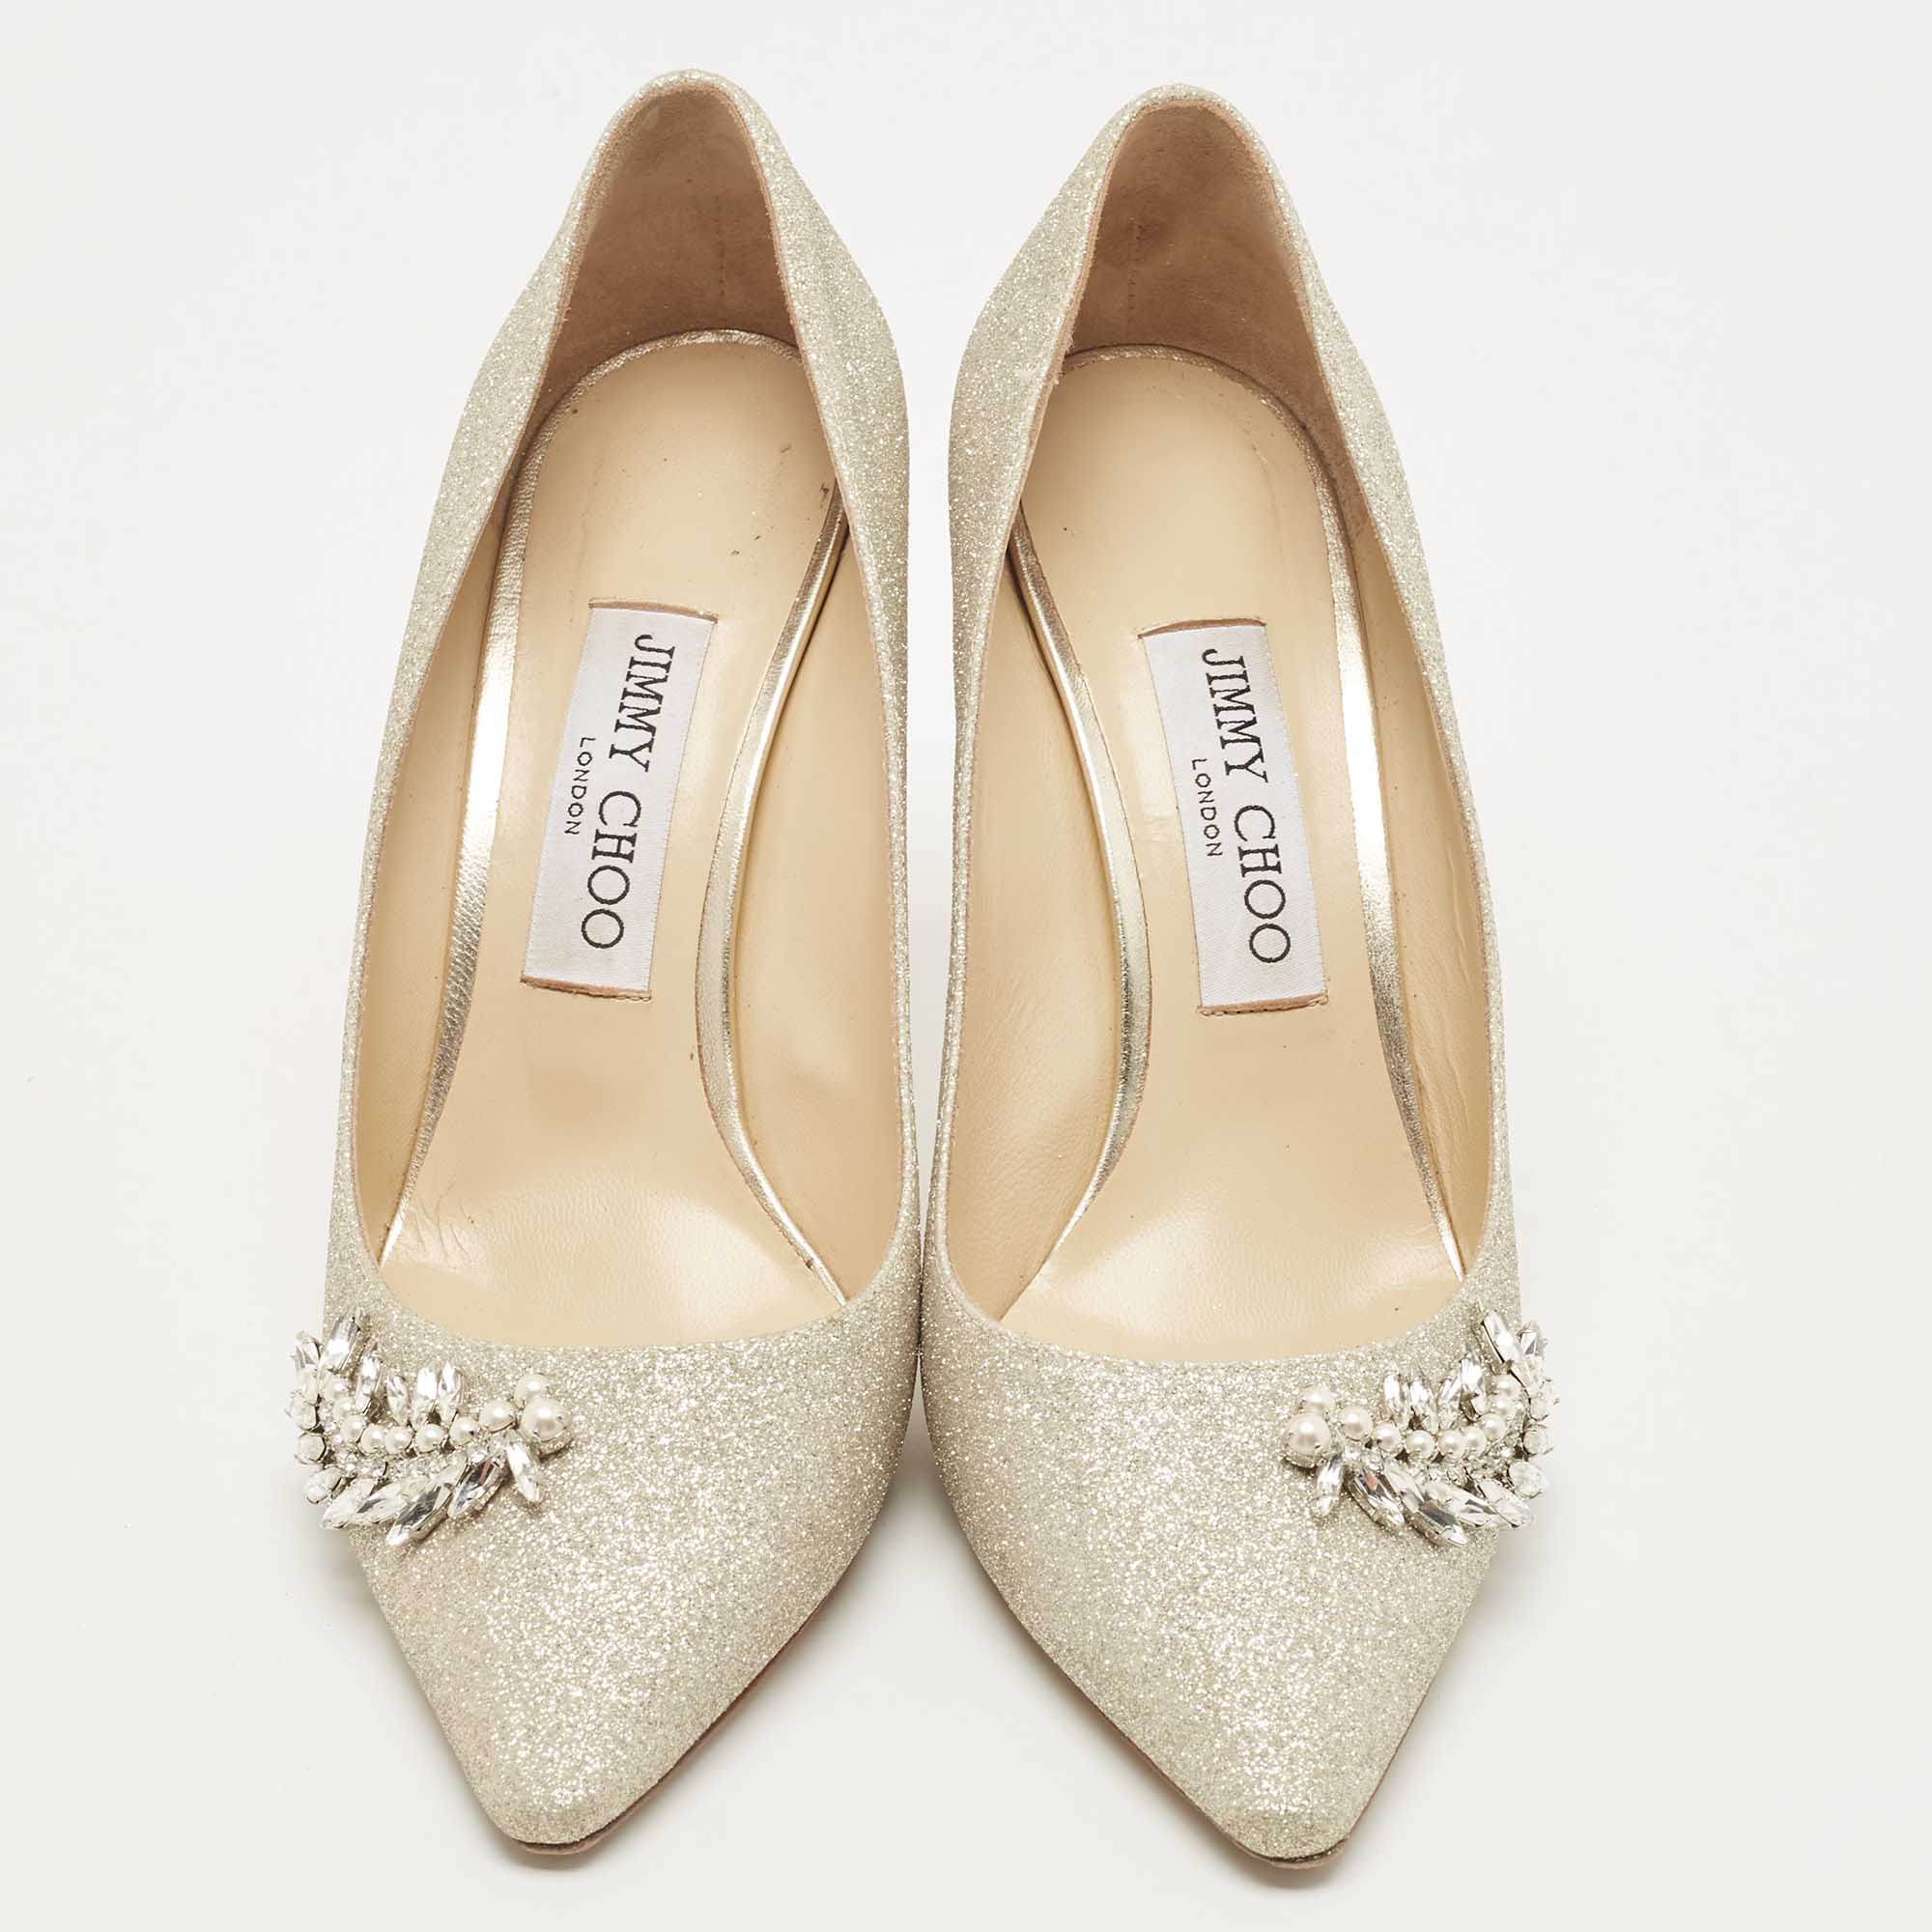 Jimmy Choo Gold Glitter Romy Pointed Toe Pumps Size 38